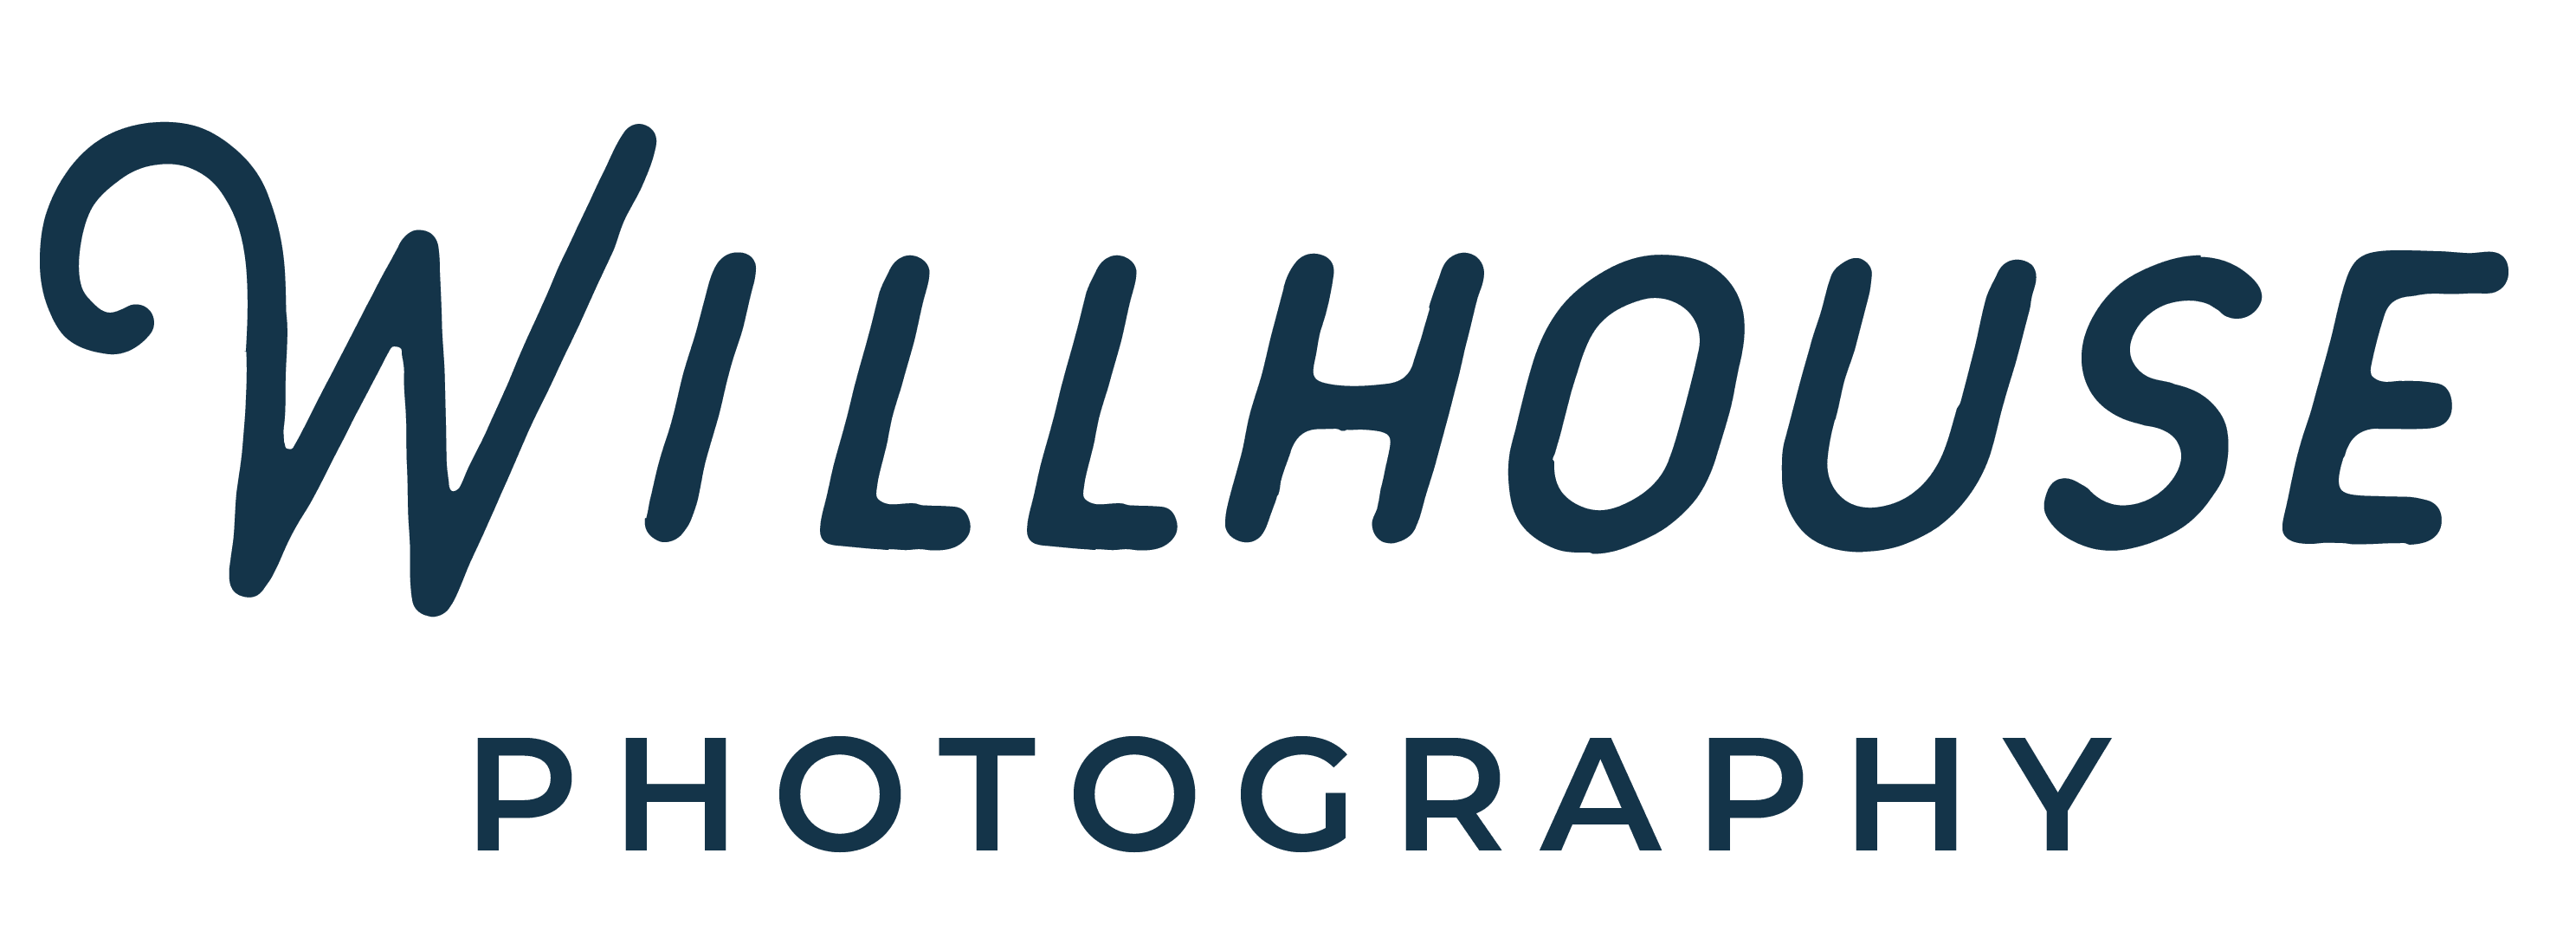 Willhouse Photography